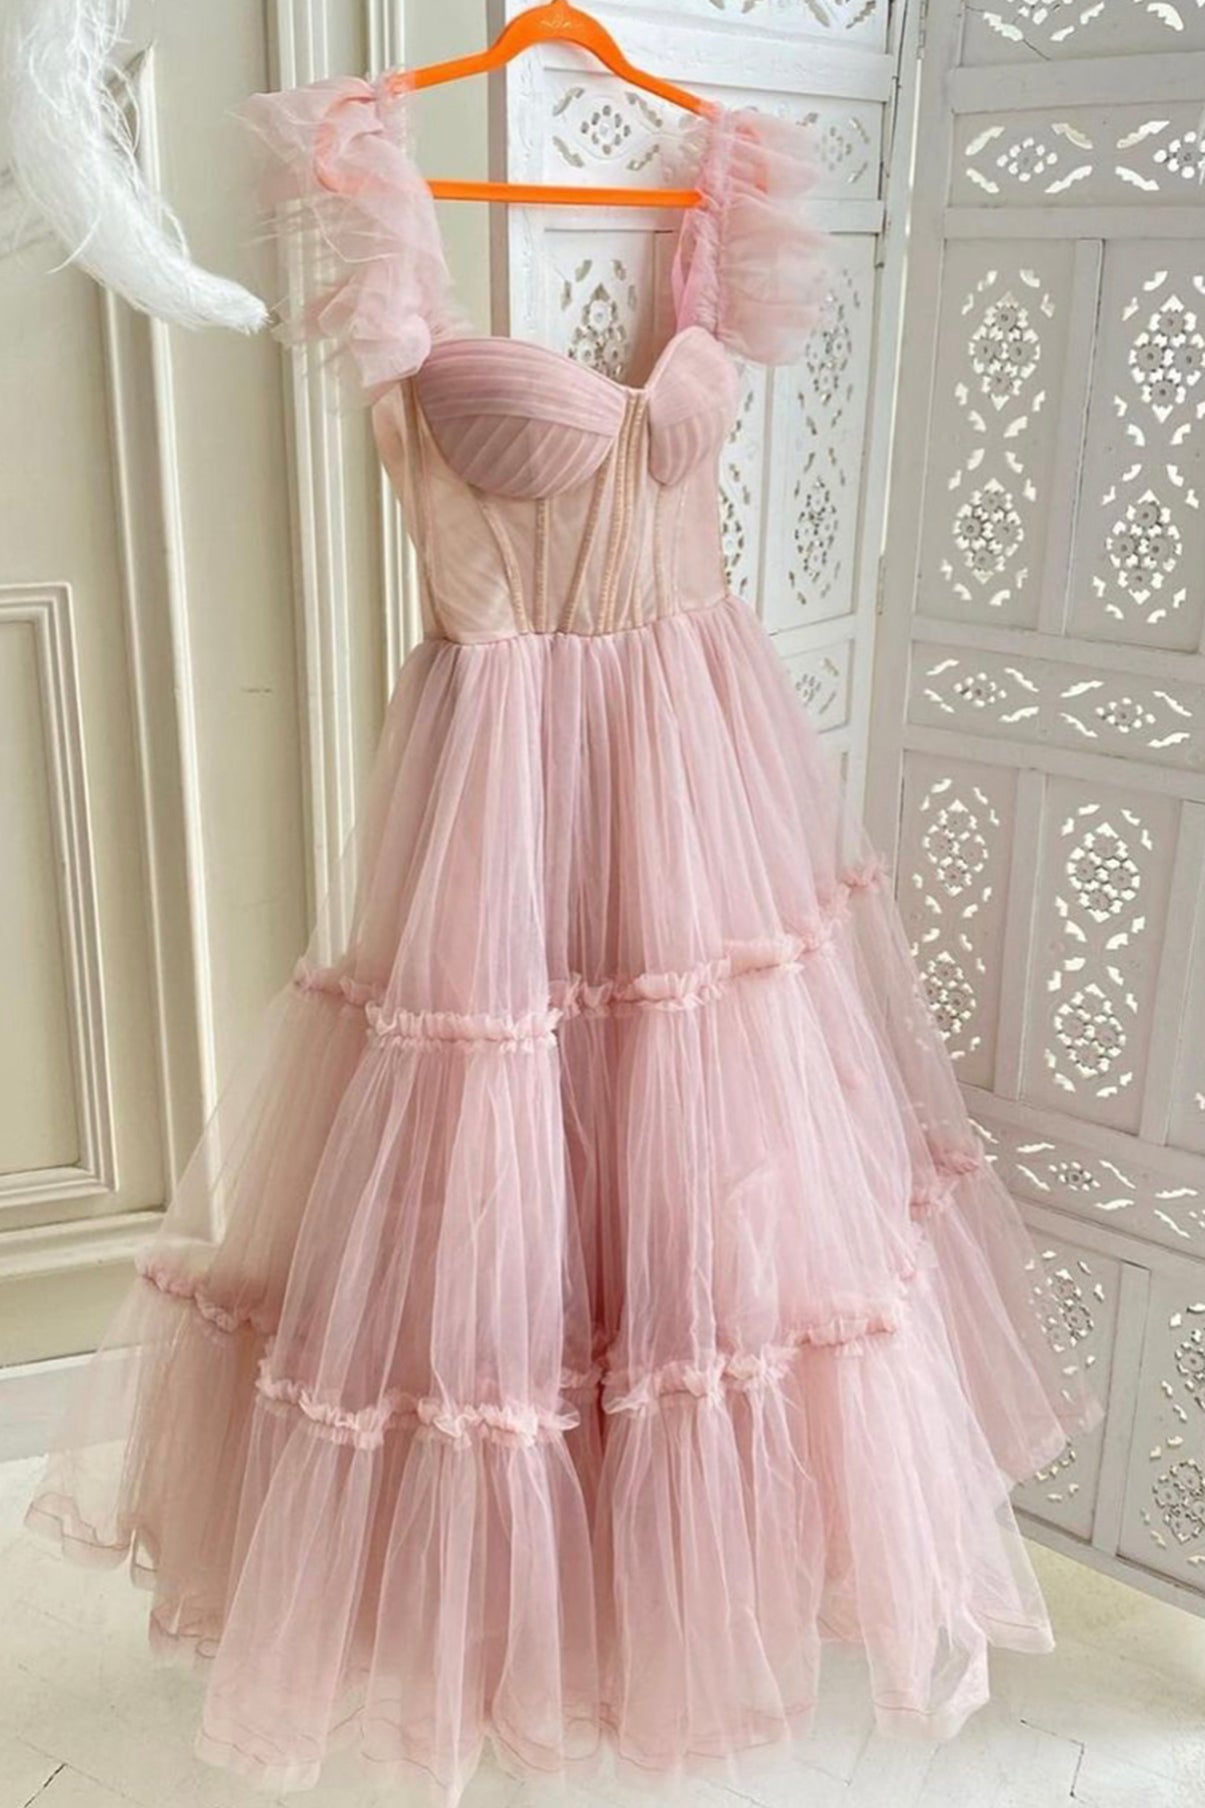 Homecoming Dress Idea, Pink Tulle Short Prom Dresses, A-Line Party Homecoming Dresses